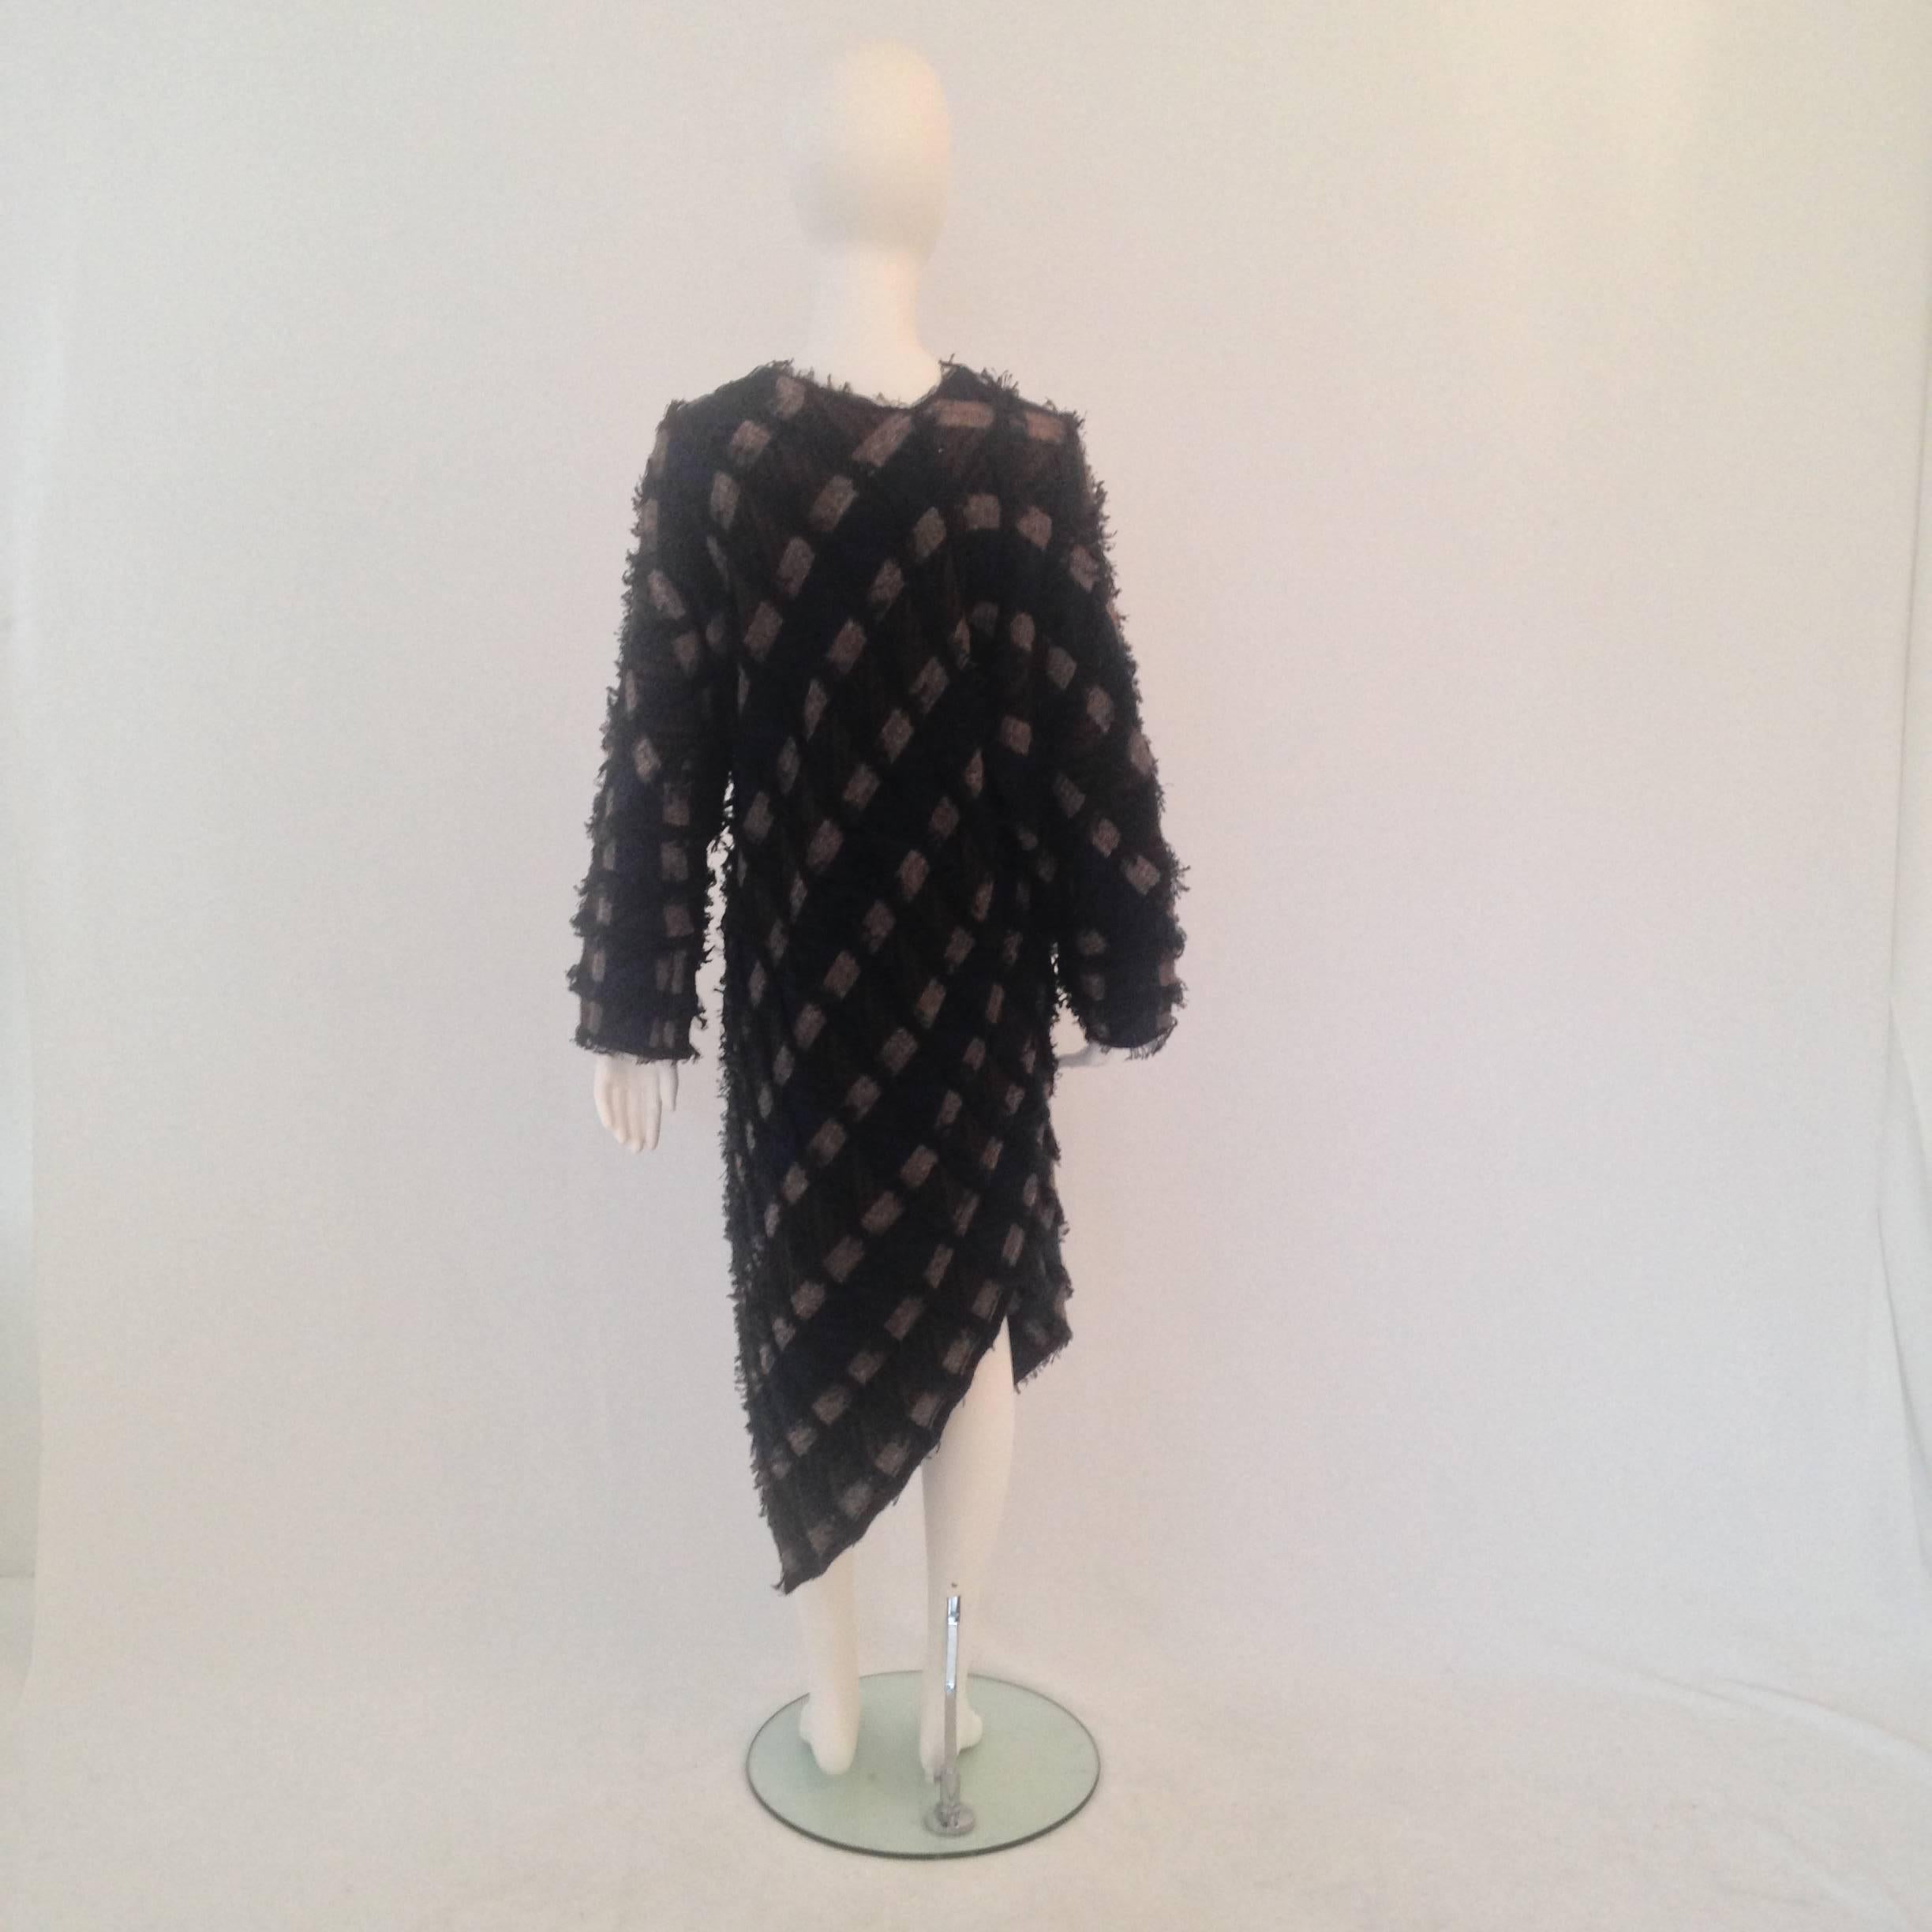 Issey Miyake 1980's knit woven dress features an asymmetrical hemline and slightly oversized fit.